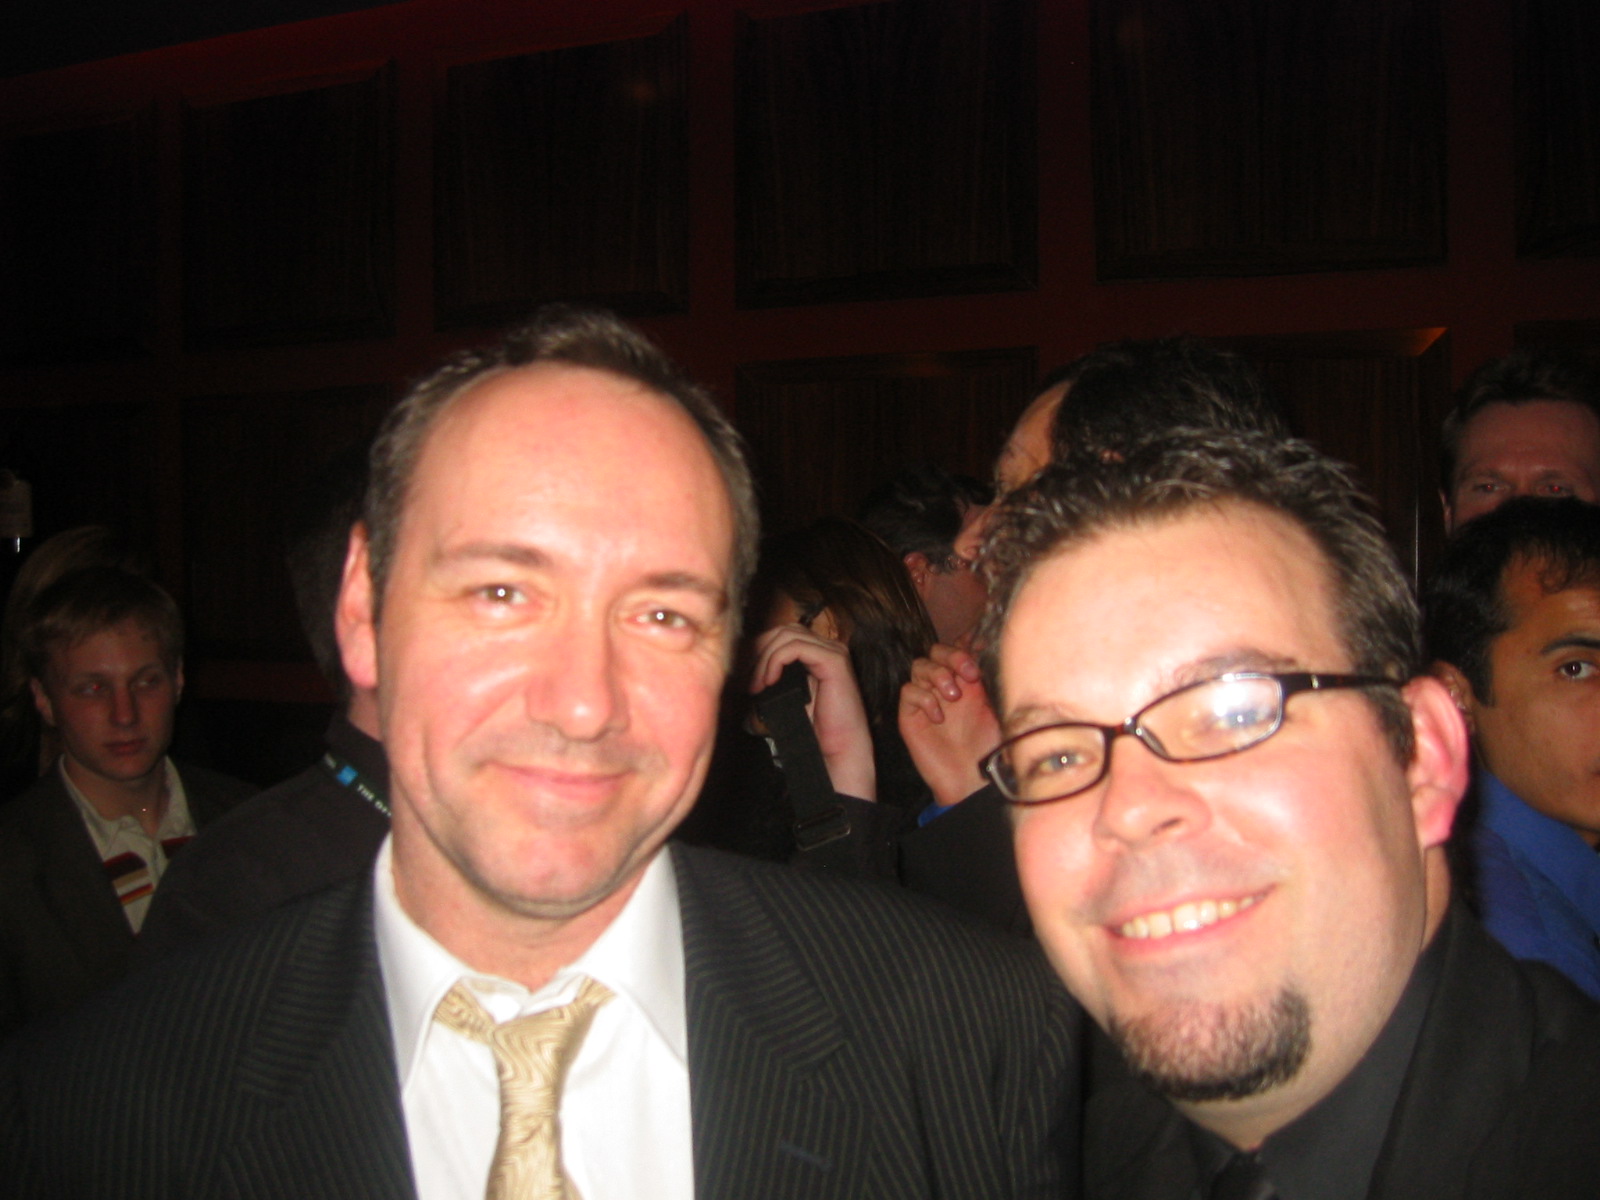 Kevin Spacey and Jeffrey Travis at the Tribeca Film Festival